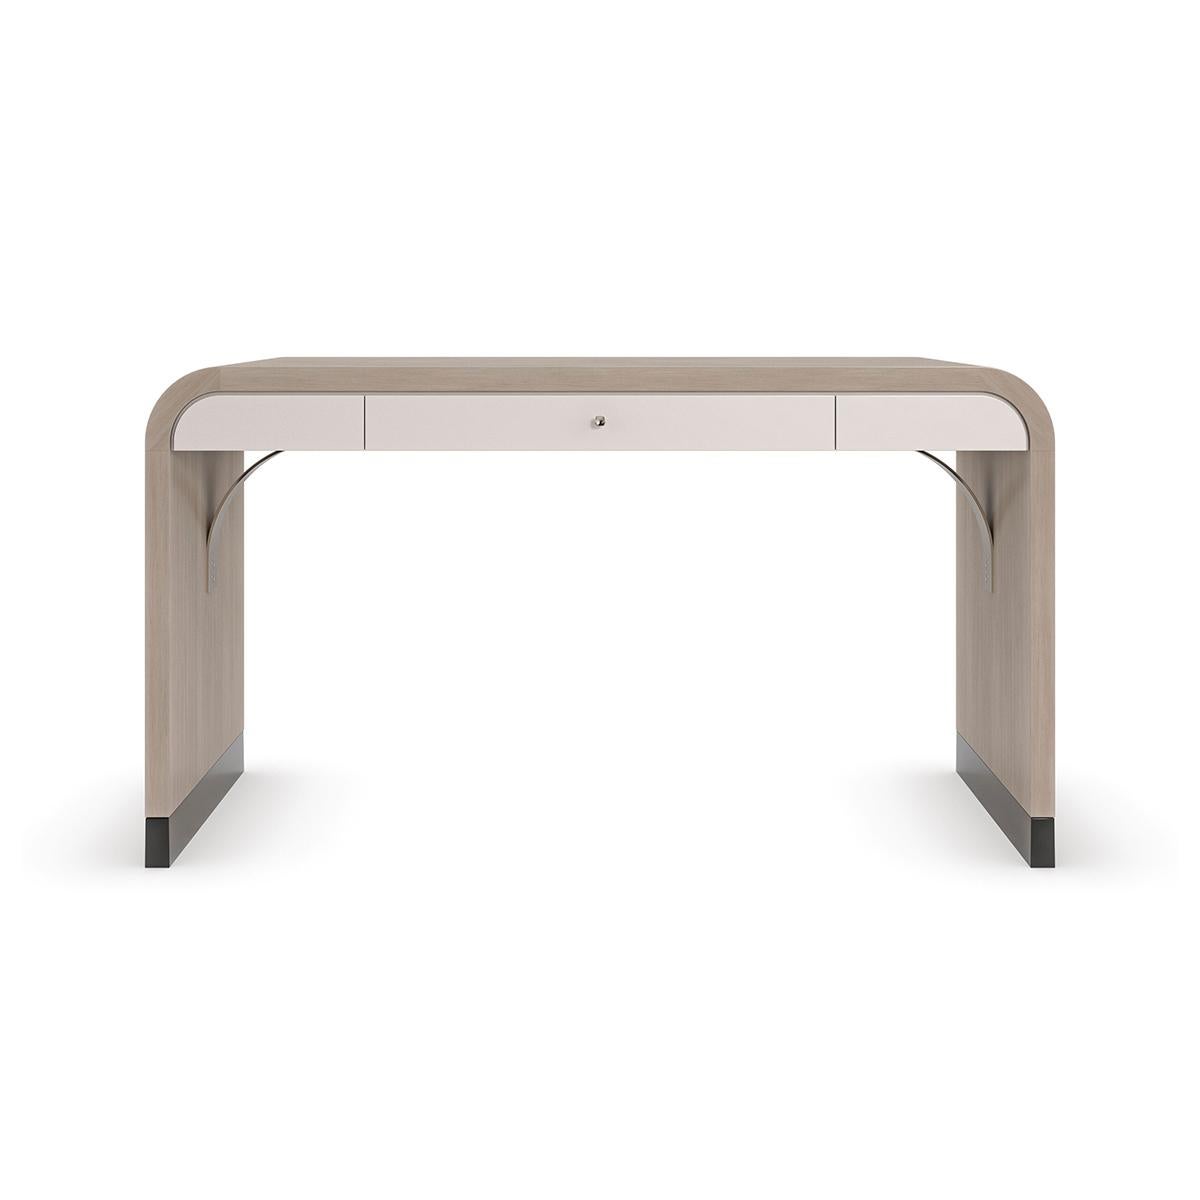 Herringbone Waterfall Desk, create a serene space for work and moments of reflection with this parsons style desk, engaging the senses with its fluid form and gently rounded edges.

A pearlescent Moonstone finish gives light to the exquisite